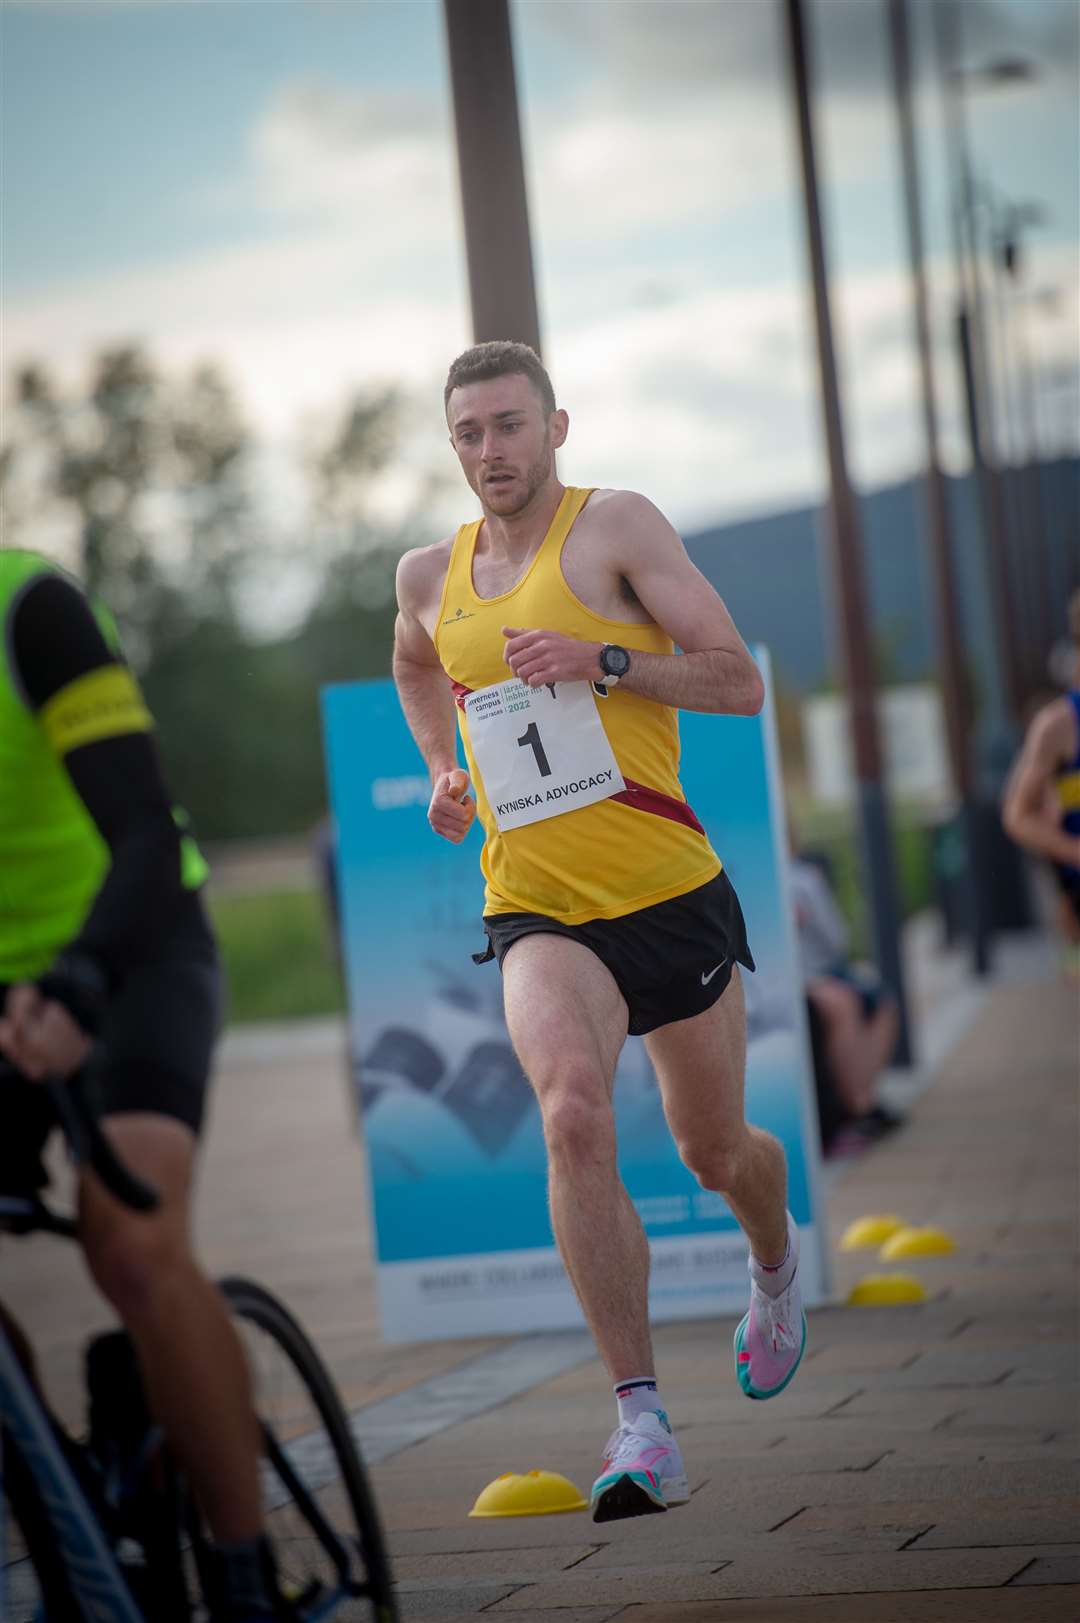 Sean Chalmers plans to battle through the pain to compete in tomorrow's River Ness 10k. Picture: Callum Mackay